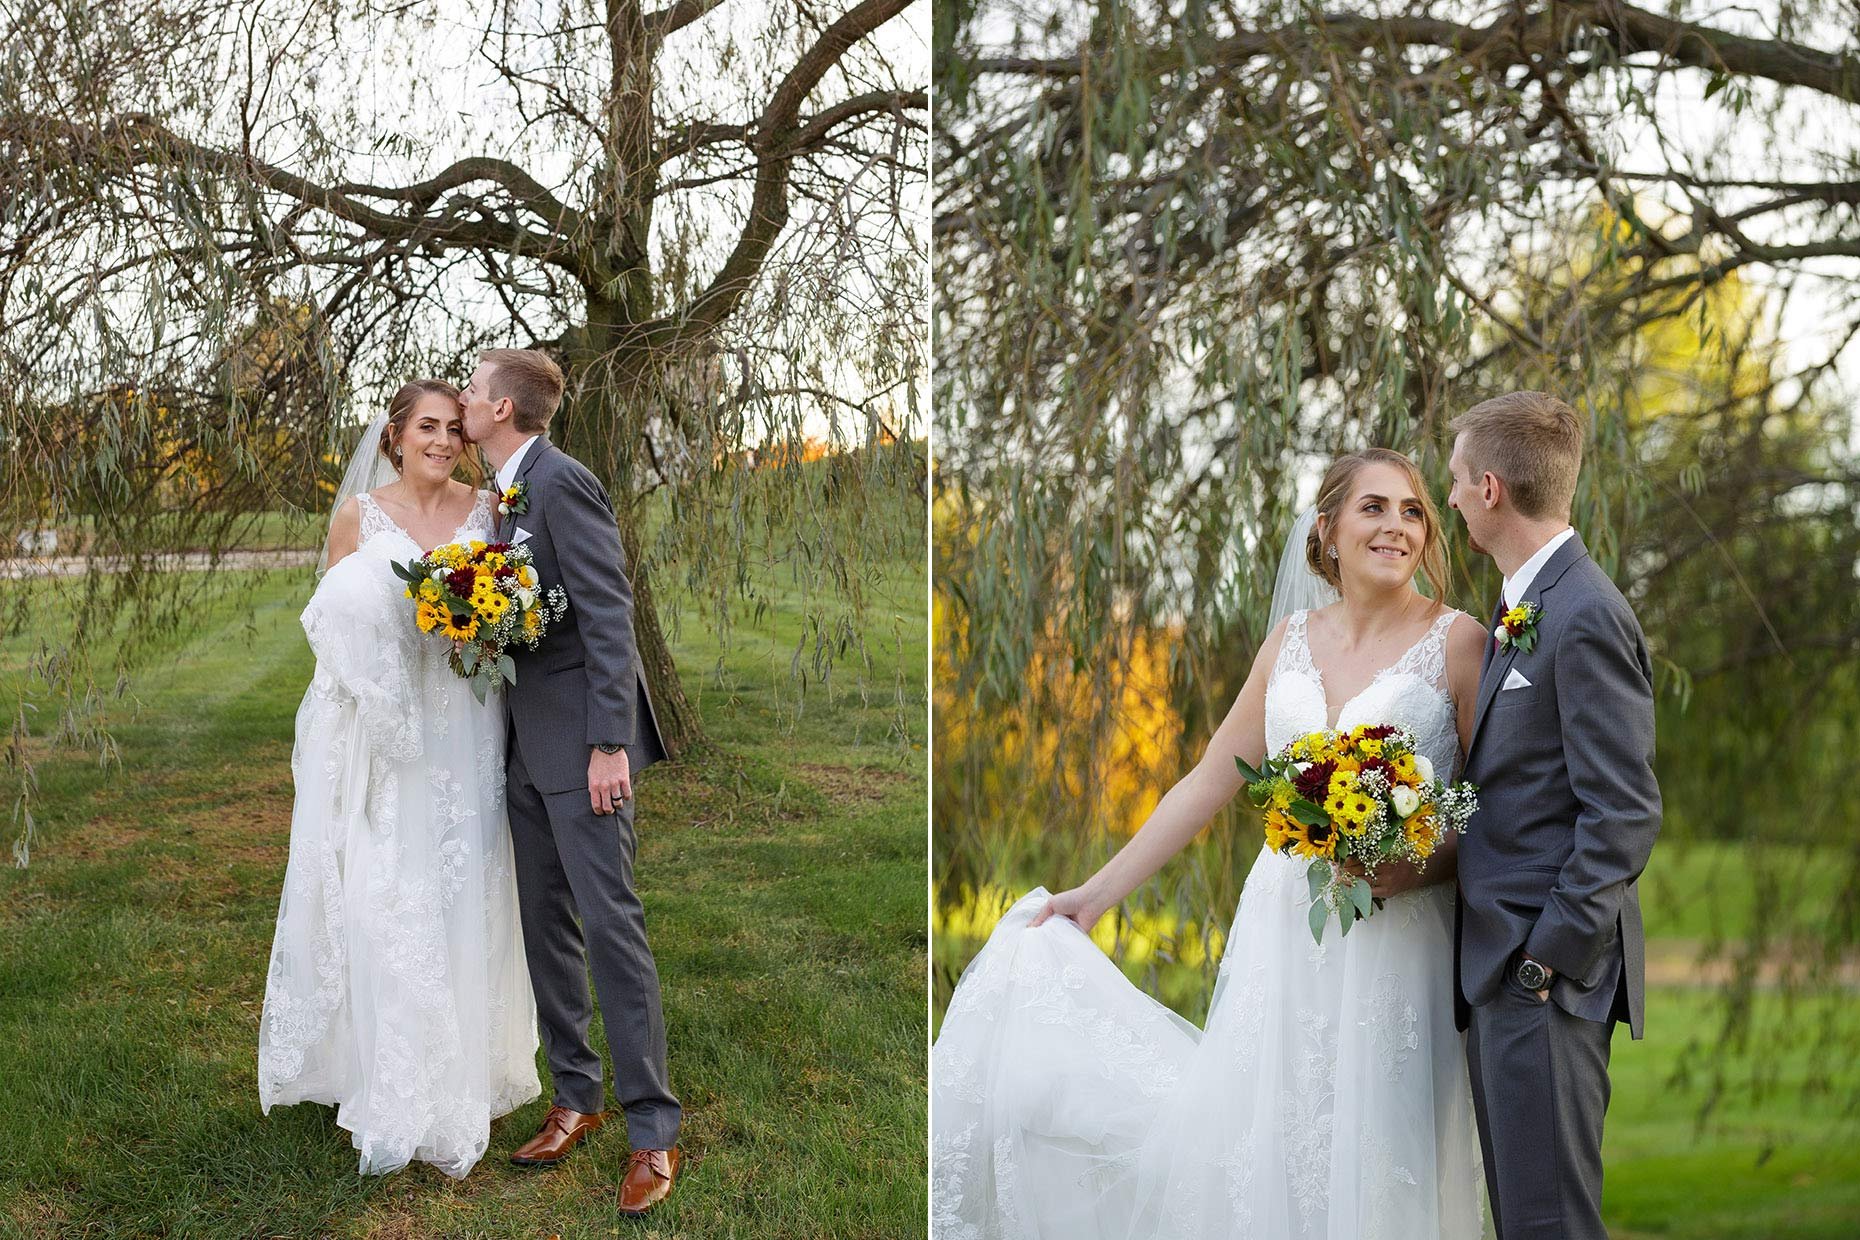 Groom kissing bride's forehead under a willow tree